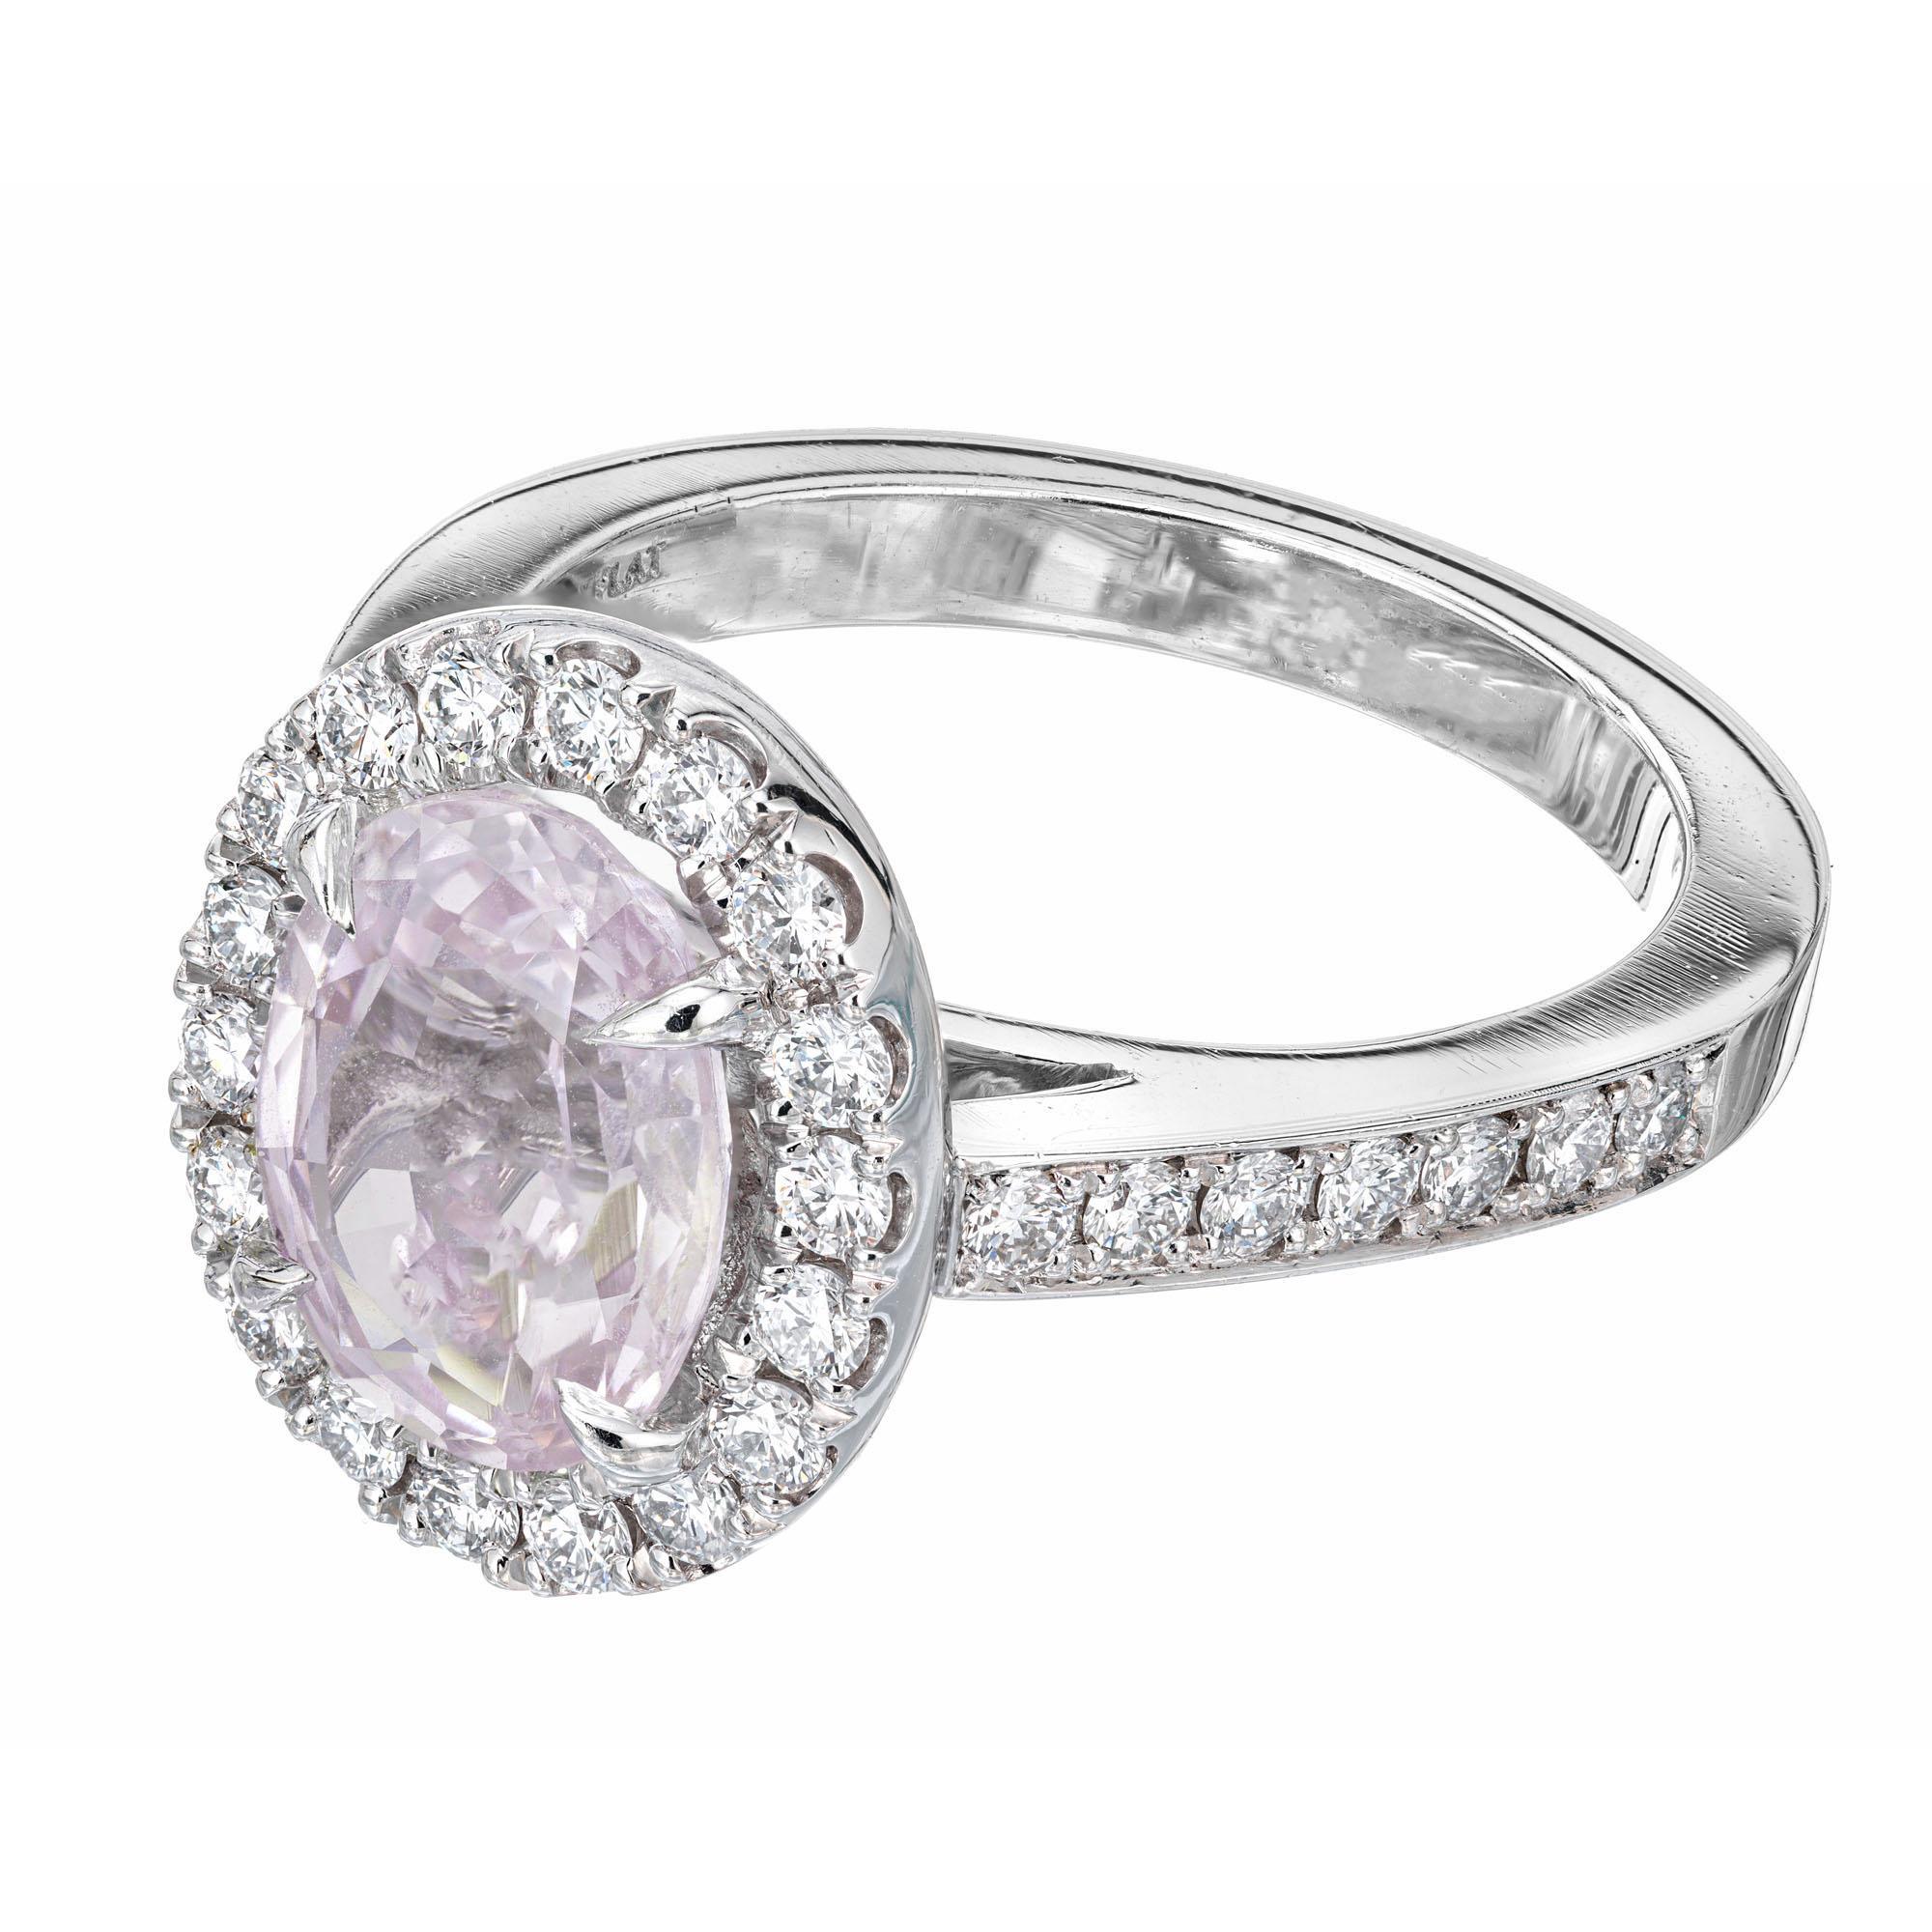 Peter Suchy GIA 2.74 Carat Oval Pink Sapphire Diamond Halo Platinum Ring In New Condition For Sale In Stamford, CT